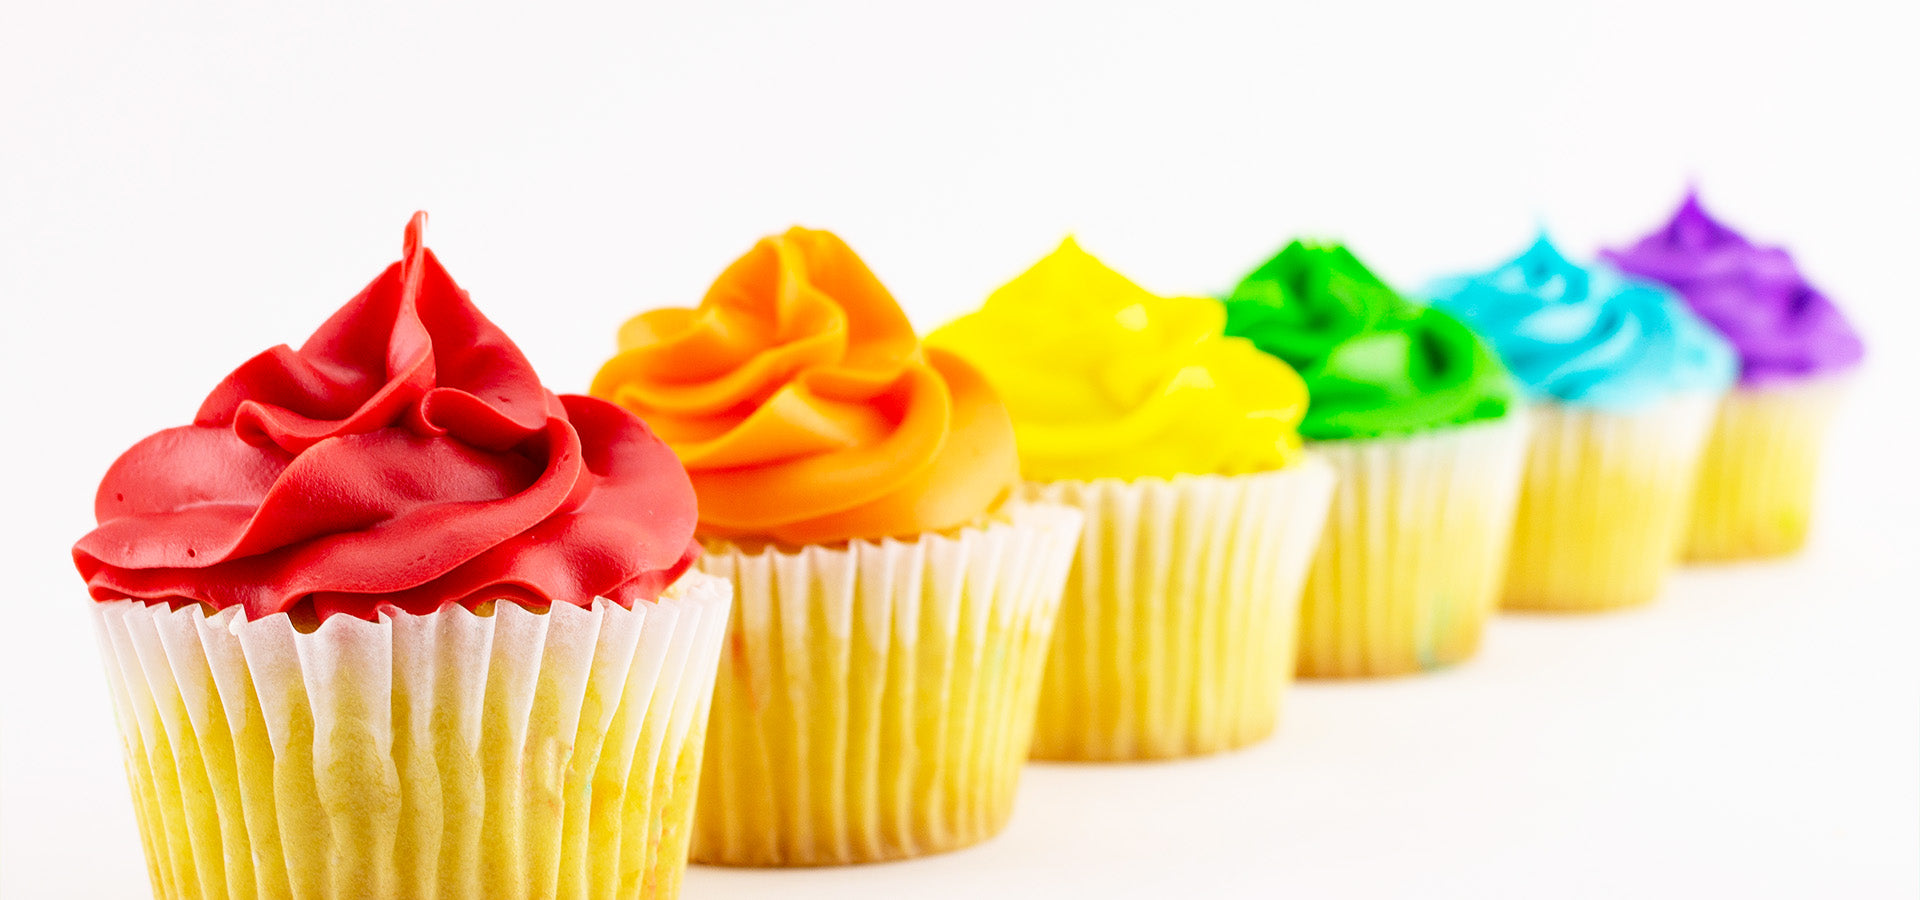 Line of colorful cupcakes frosted in the colors of the rainbow